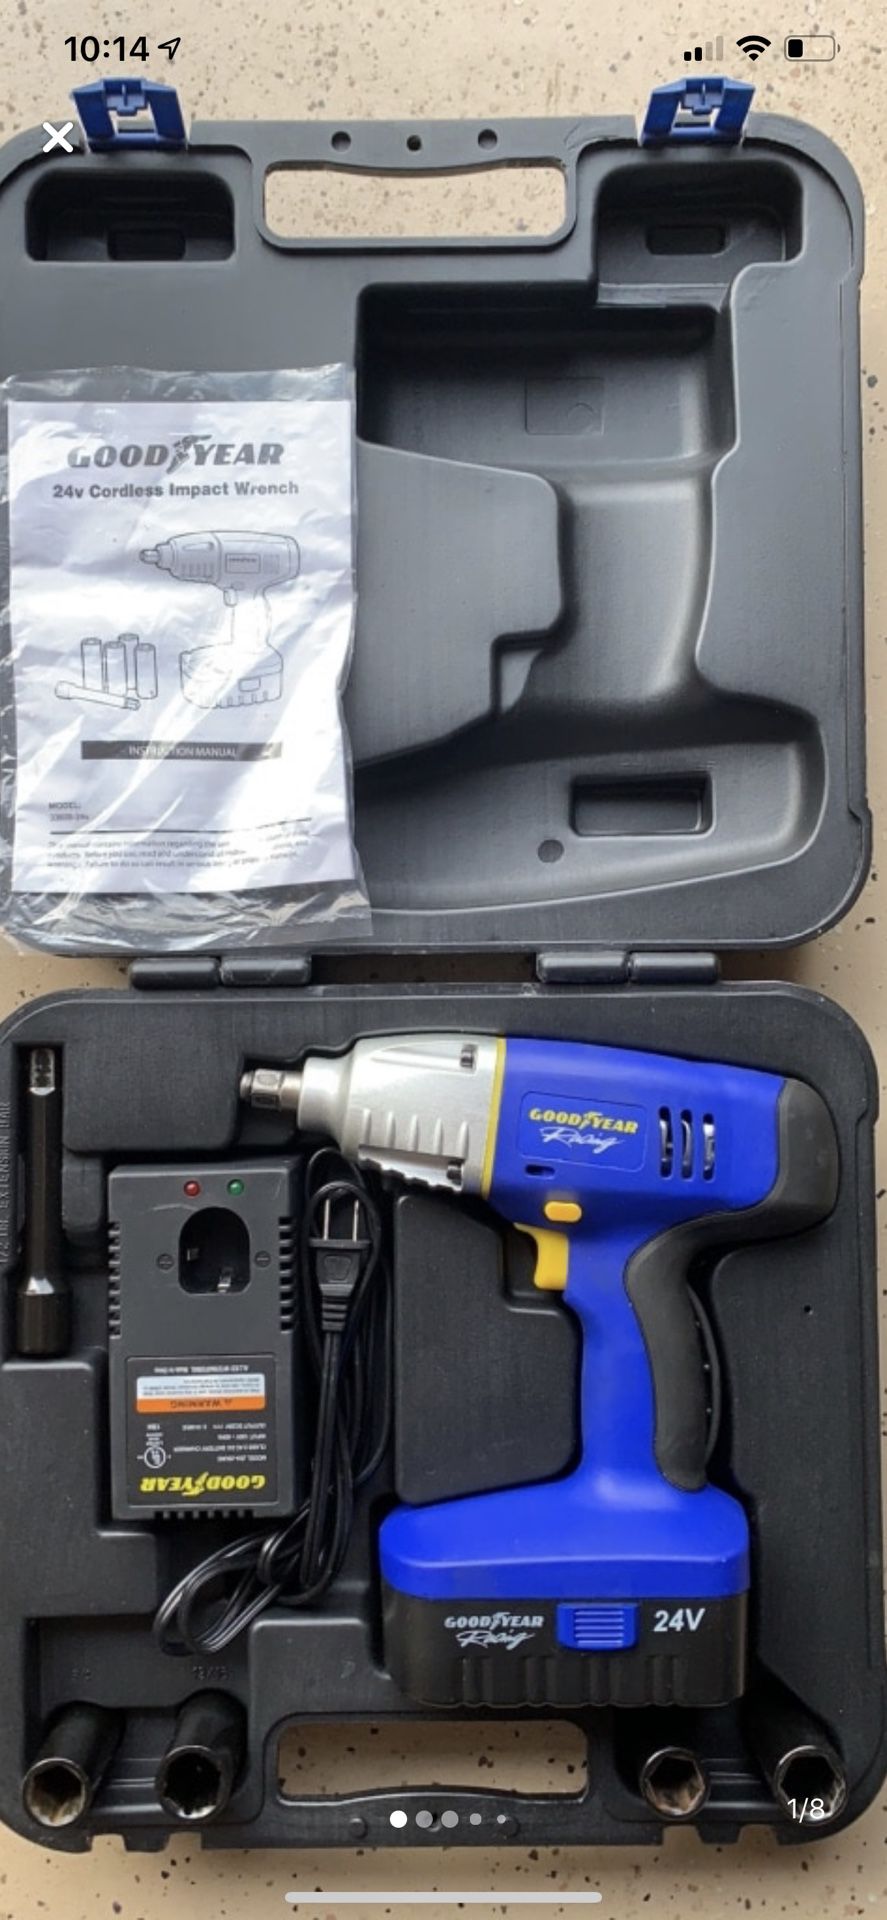 Goodyear 24v Cordless Impact Wrench